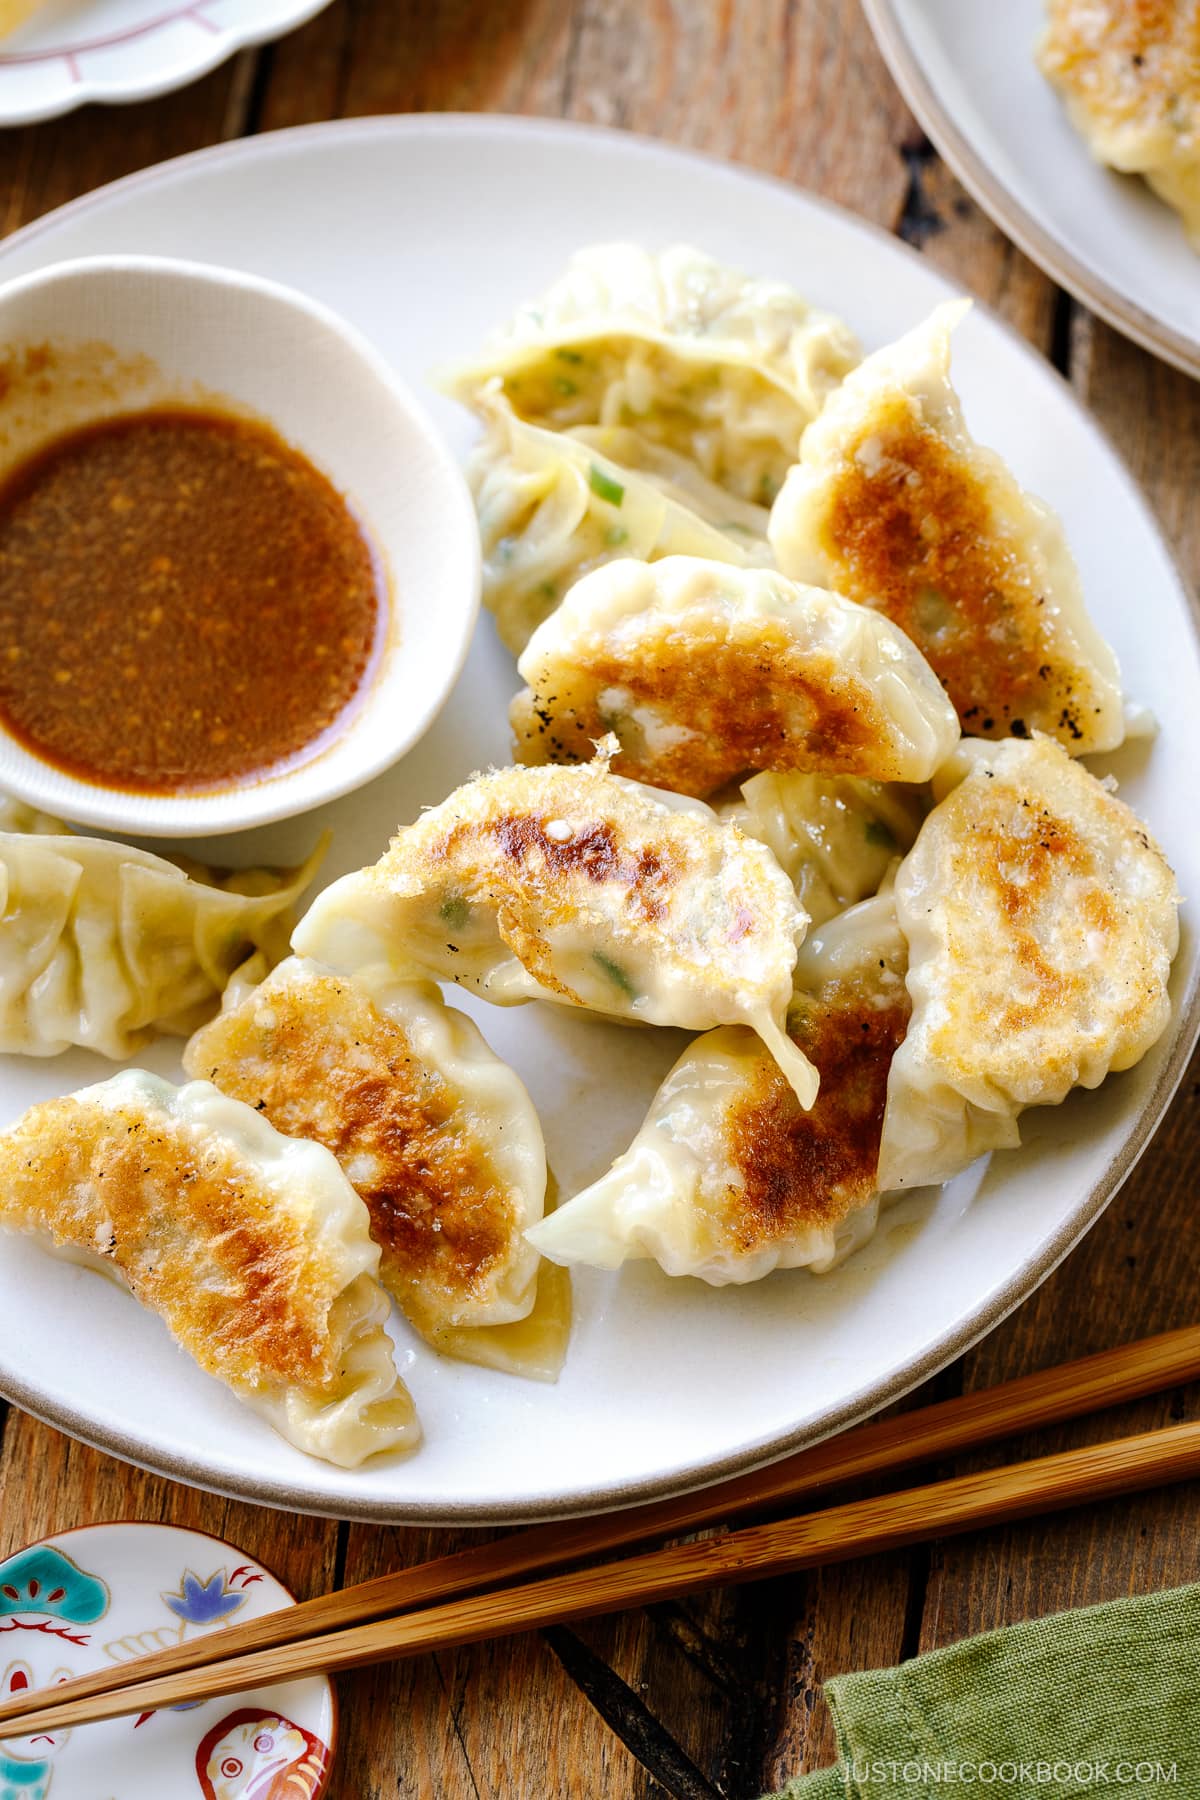 A round plate containing Japanese pan-fried dumplings, Napa Cabbage Gyoza, served with a savory miso dumpling sauce.